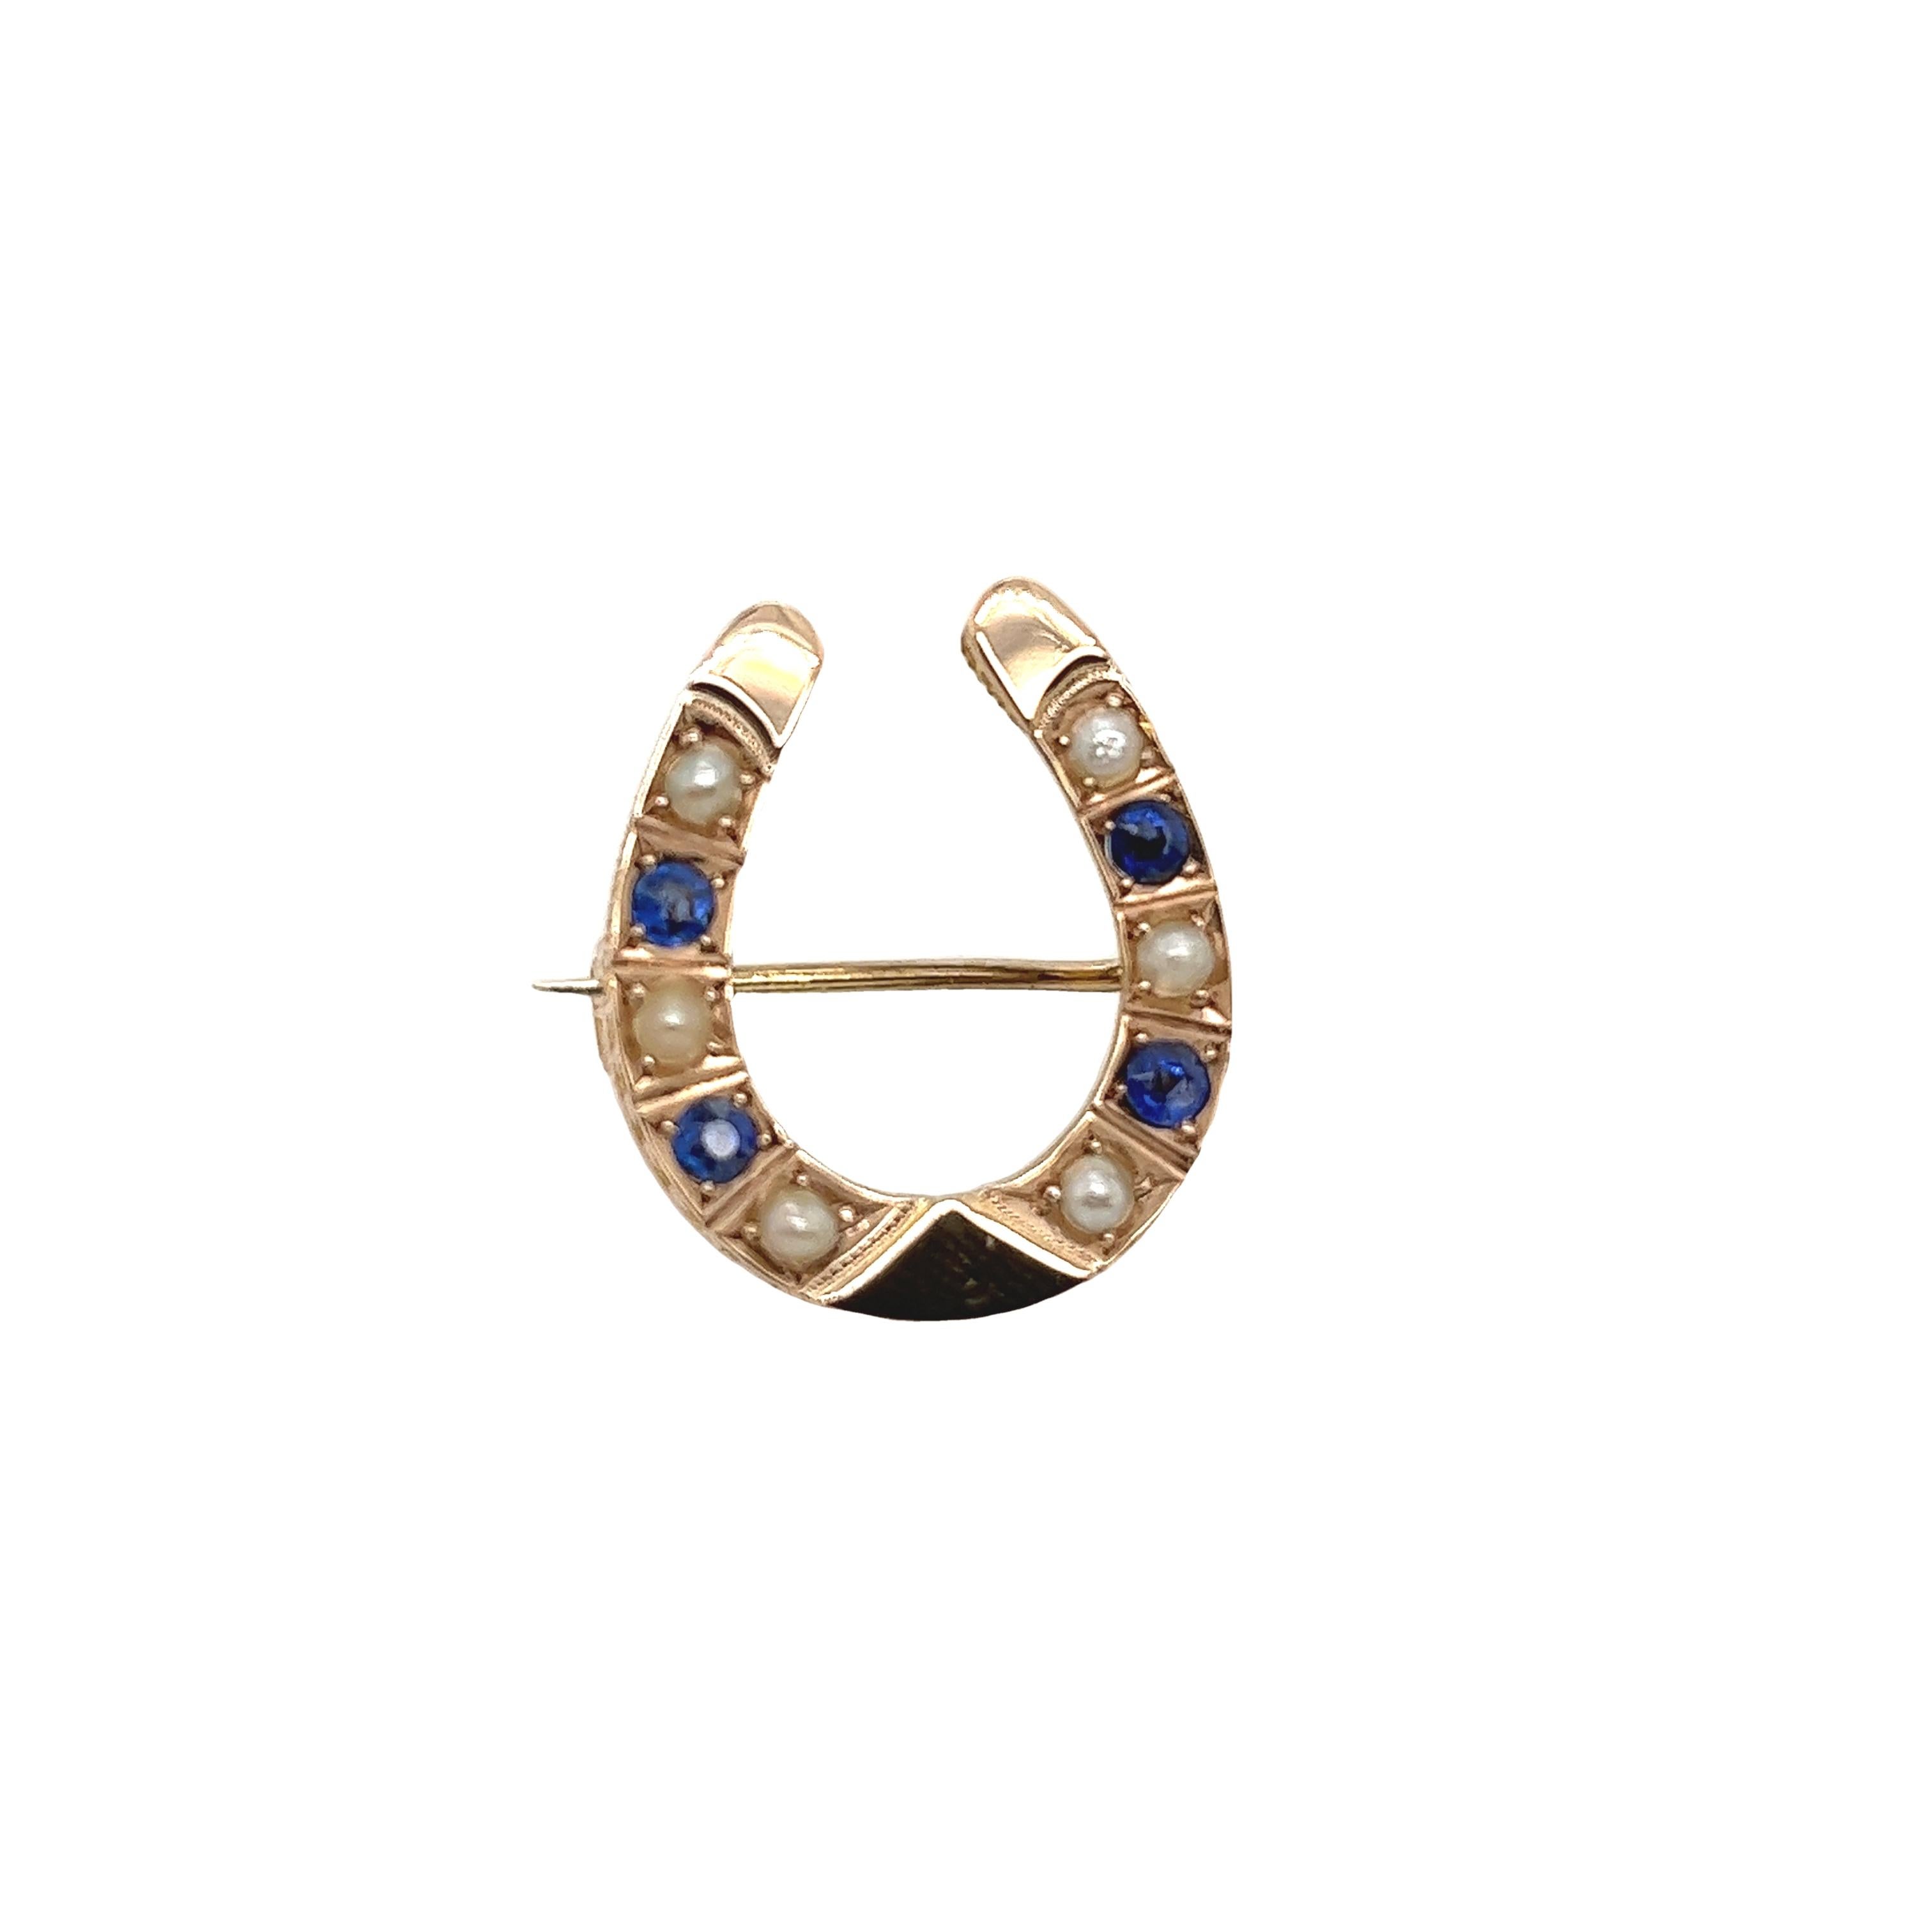 Round Cut Antique 9ct Yellow Gold Sapphire & Seed Pearl Horseshoe Brooch